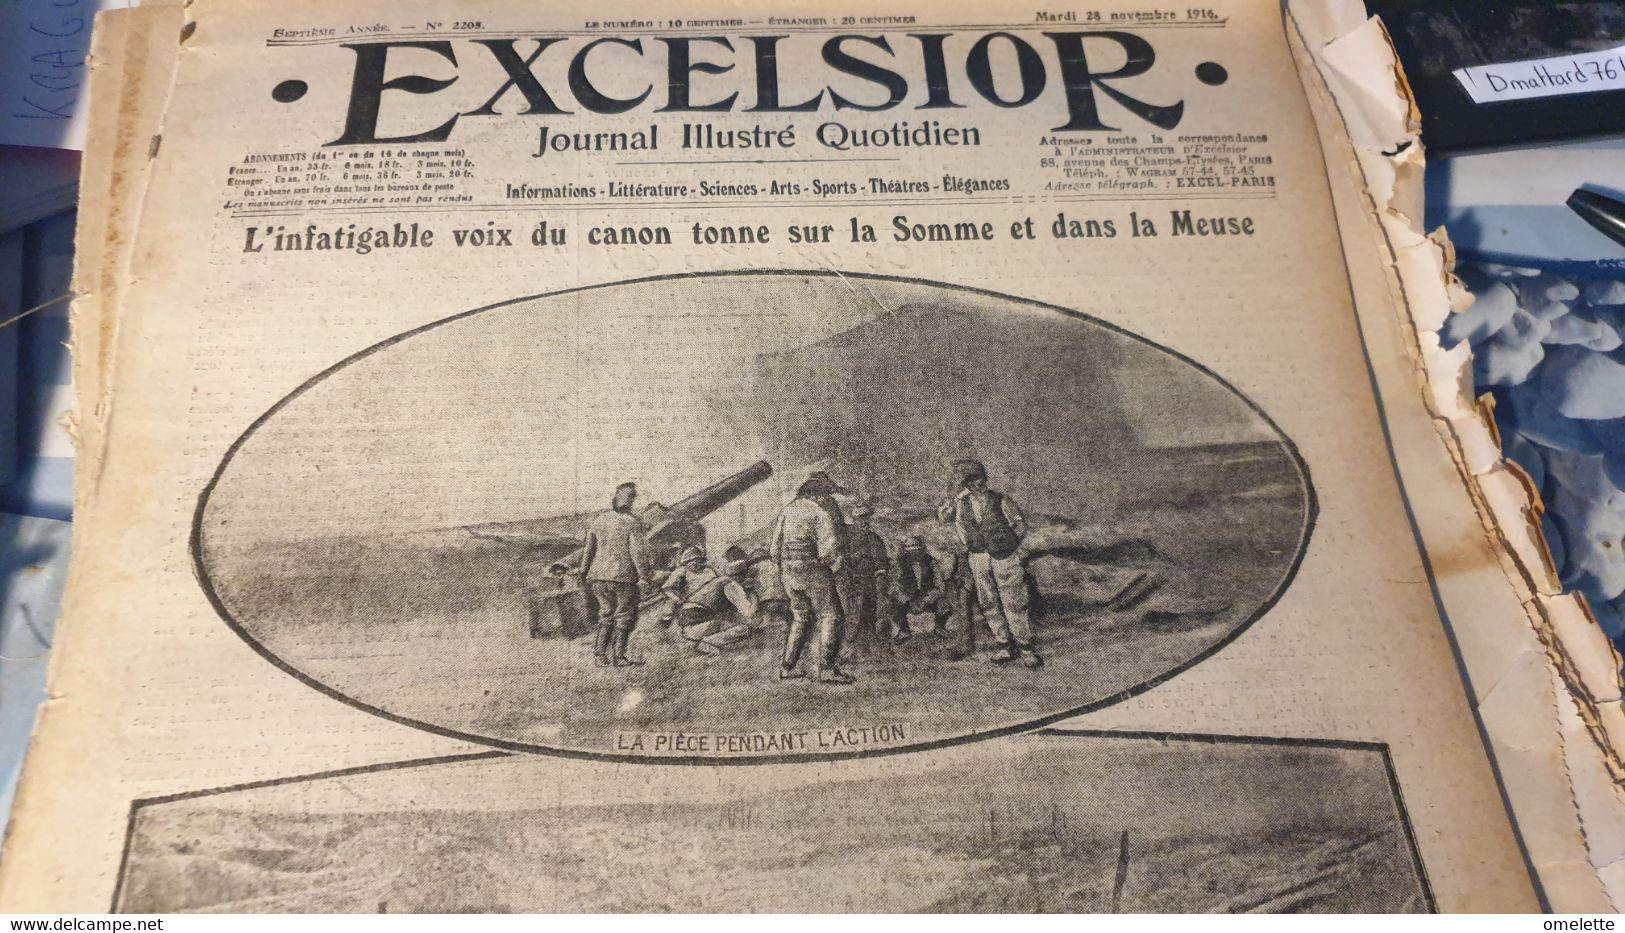 EXCELSIOR 16/CANON SOMME MEUSE /FABIANO REGIME DES ECONOMIES - General Issues